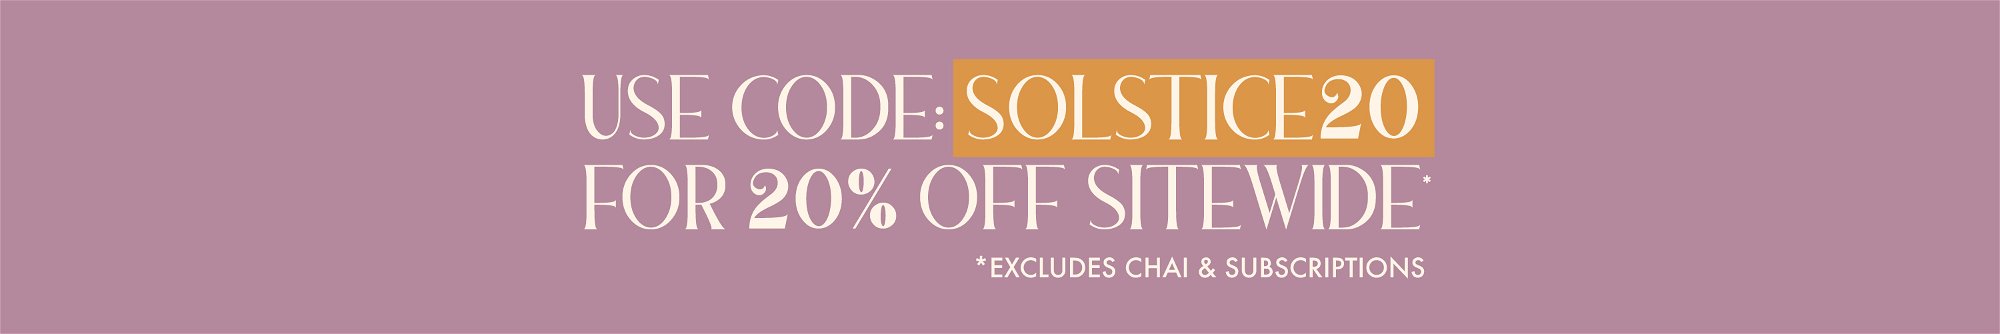 use code SOLSTICE20 for 20% off sitewide. excludes chai and subscriptions